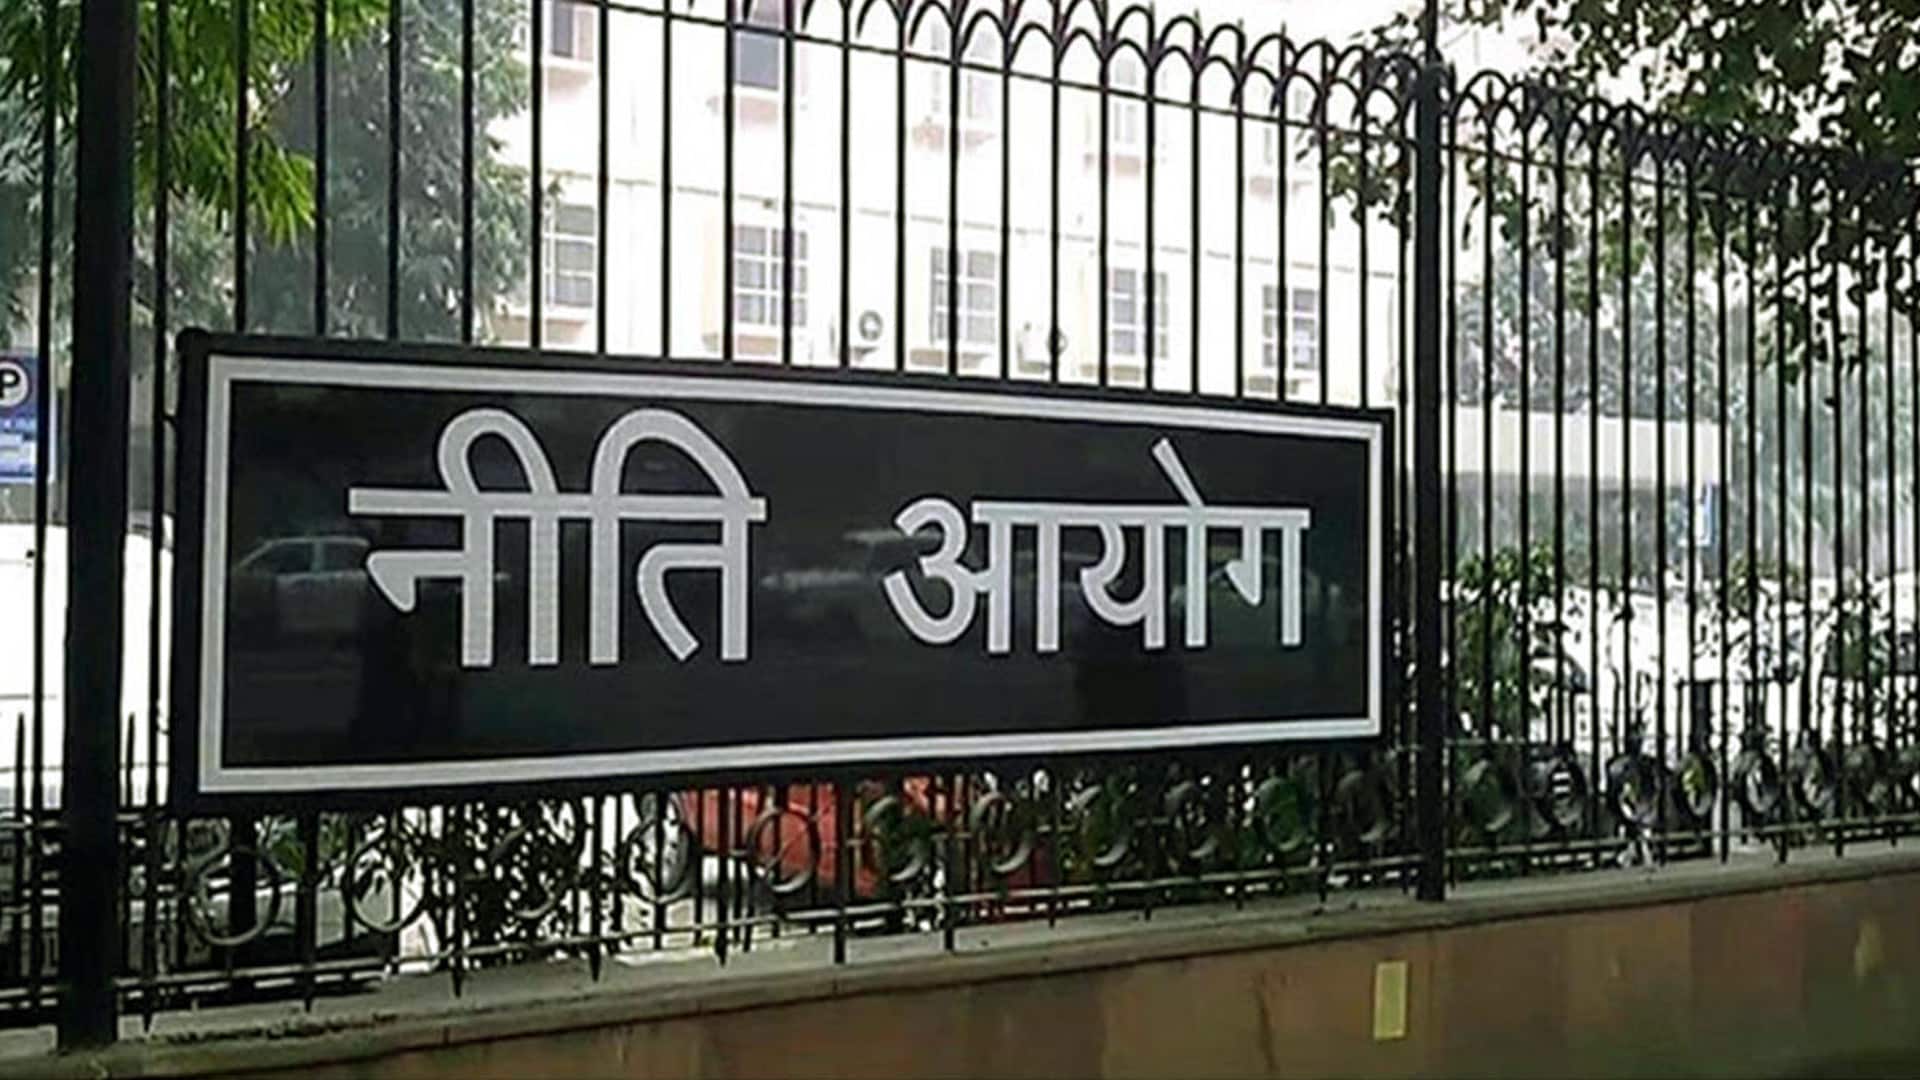 Niti Aayog looking at tax related issues of engineering, leather, textile industry